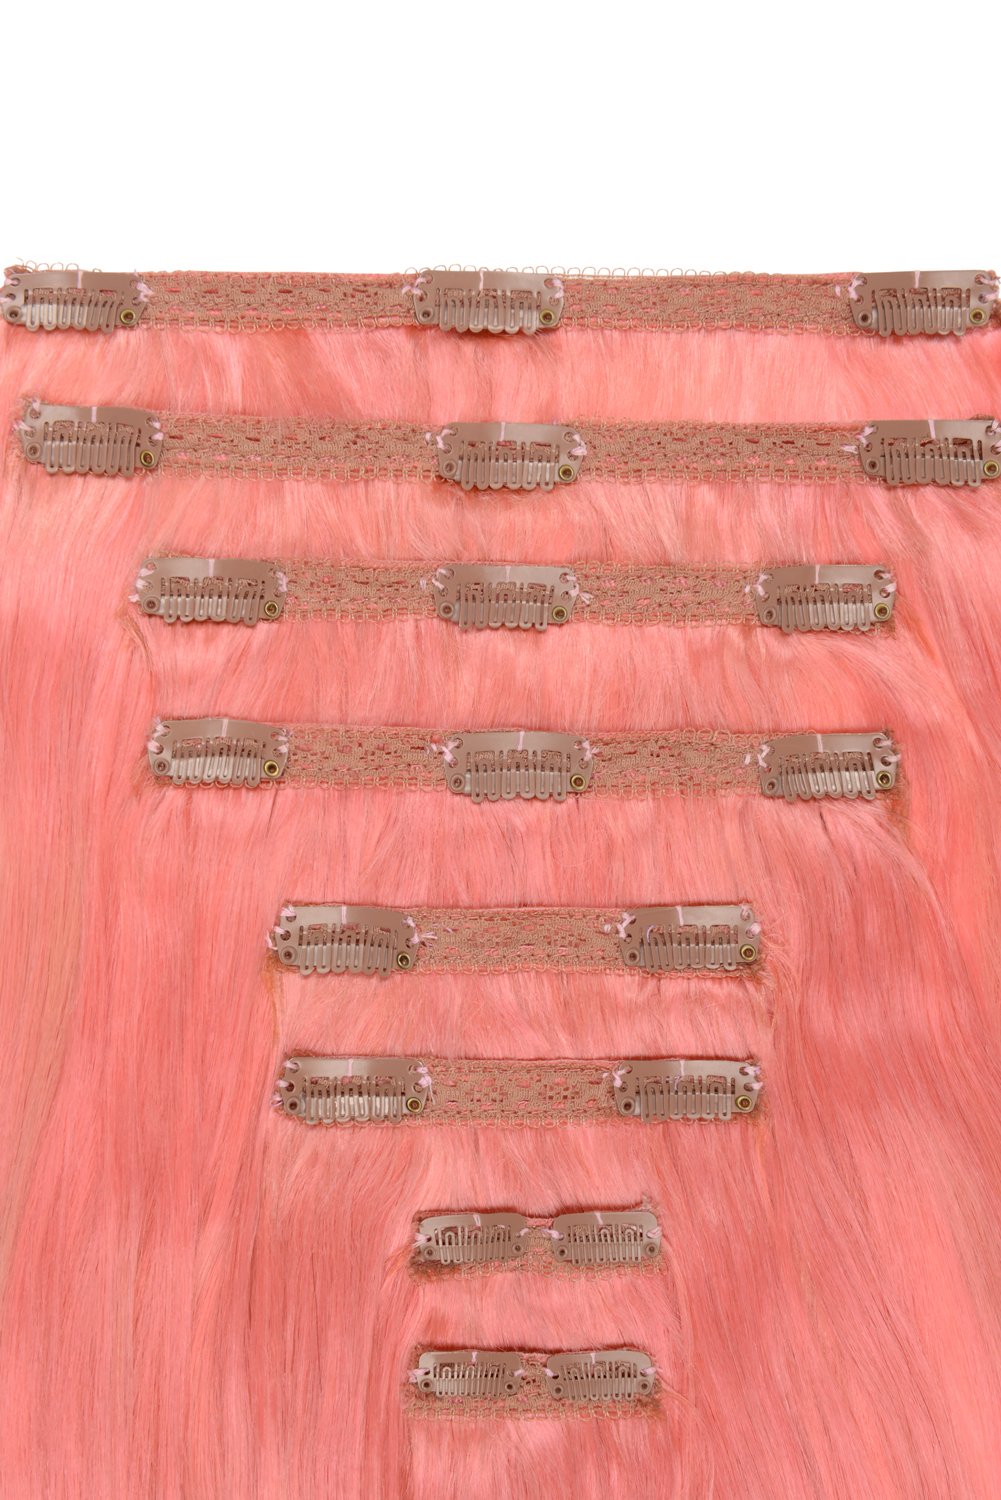 Double Wefted Full Head Remy Clip in Human Hair Extensions - Pink